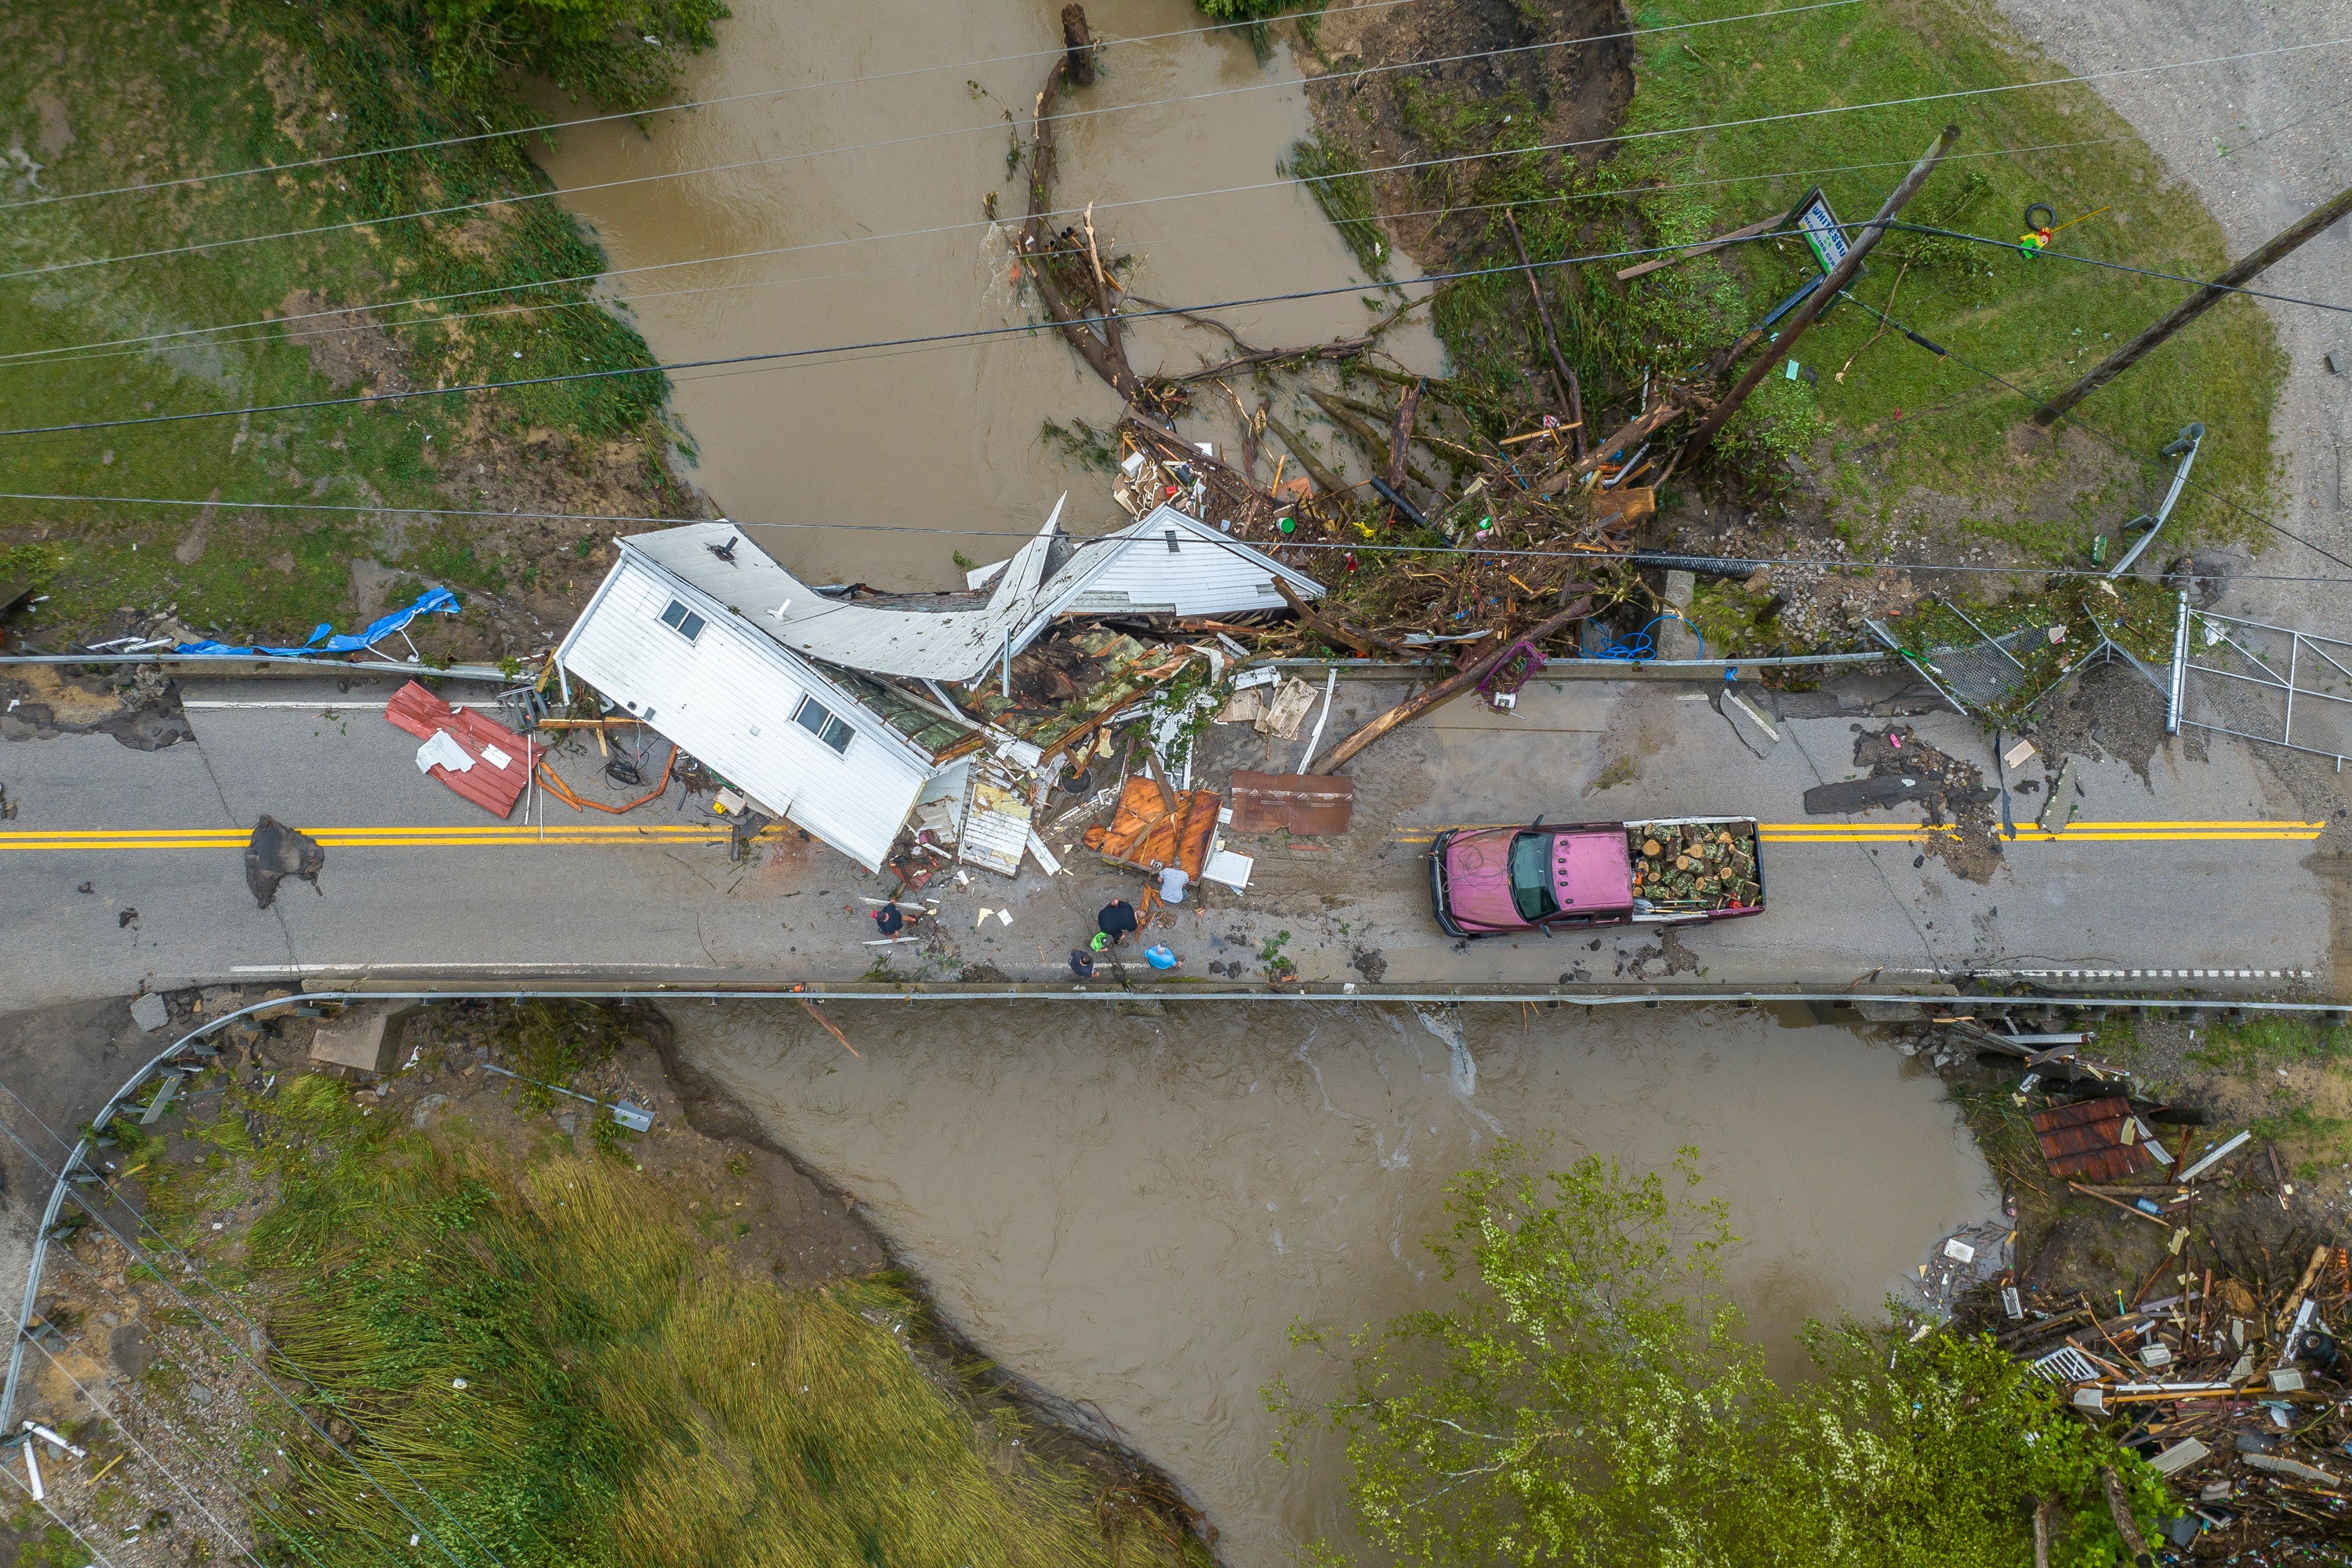 People work to clear a house from a bridge near the Whitesburg Recycling  Centre in Letcher County, Ky., on Friday, July 29, 2022. (Photo: Ryan C. Hermens/Lexington Herald-Leader, AP)